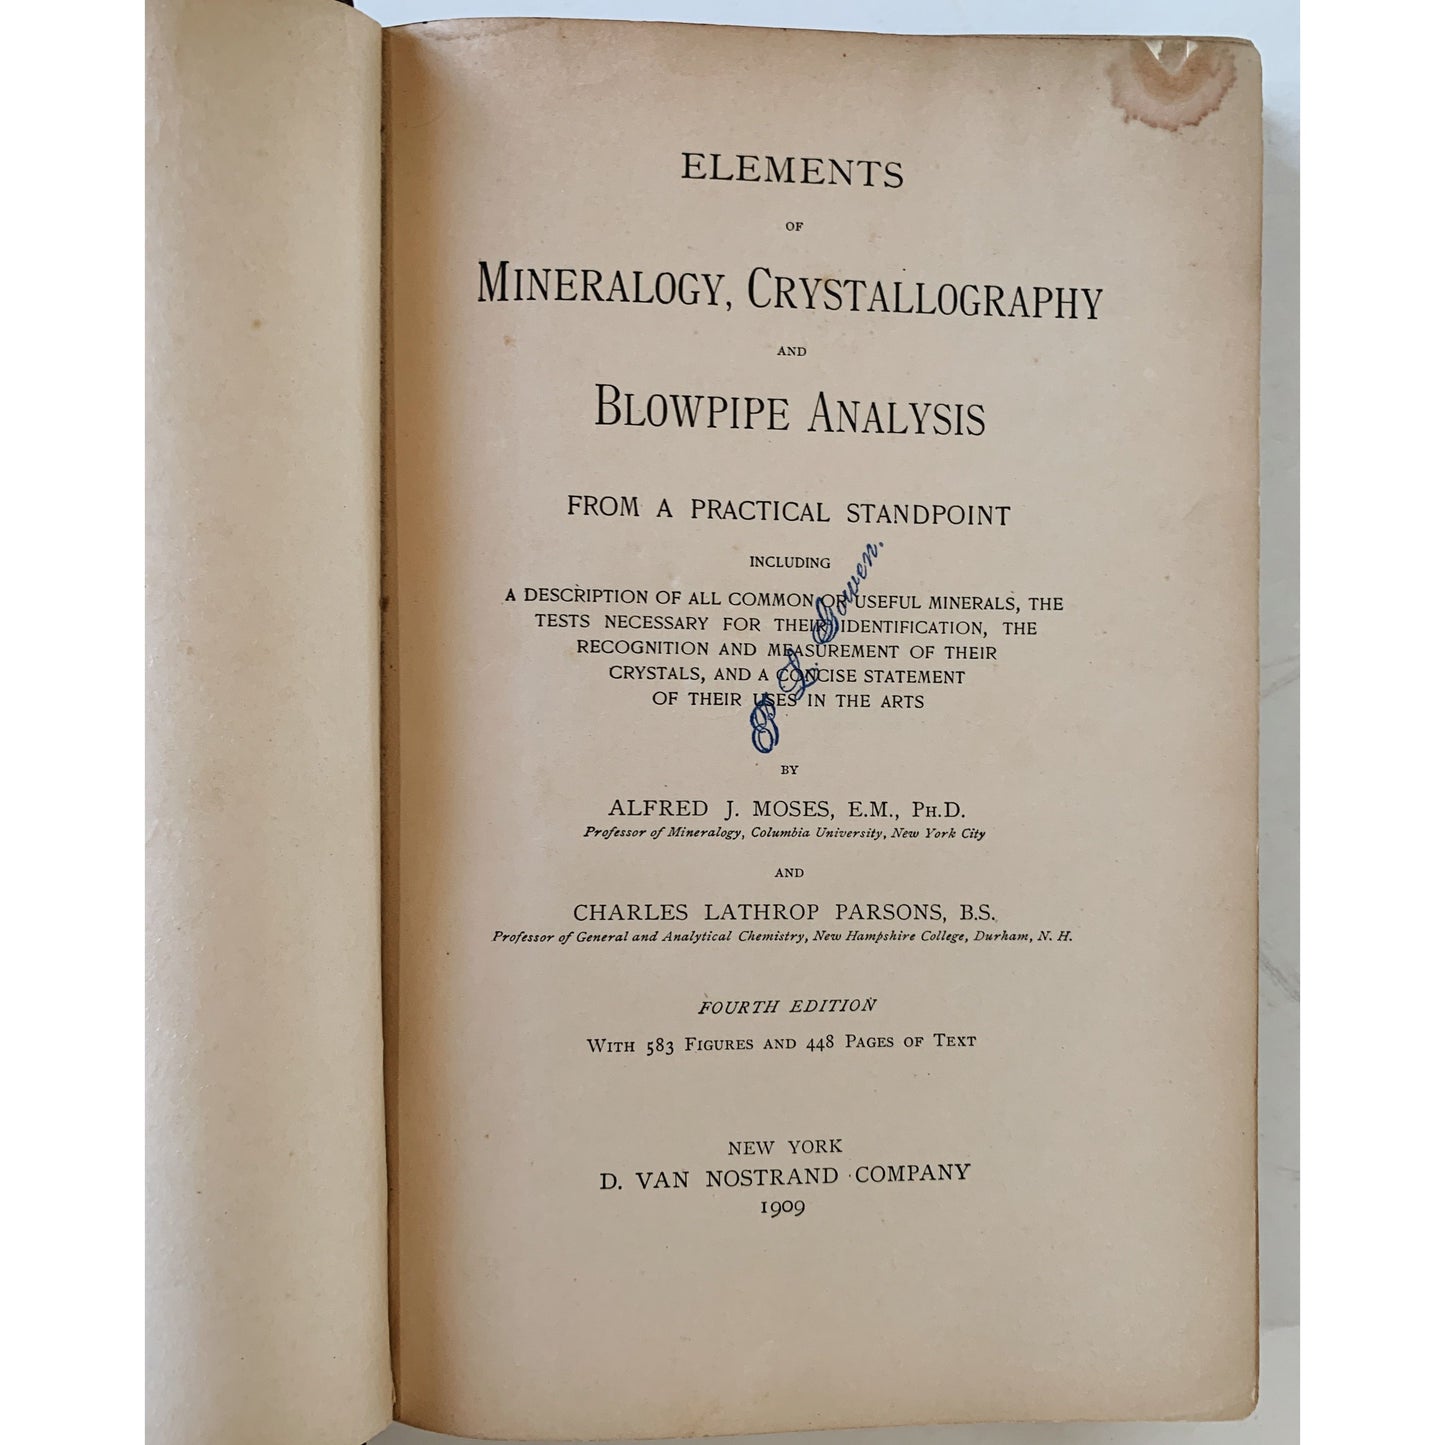 Elements of Mineralogy Crystallography and Blowpipe Analysis, Antique 1909